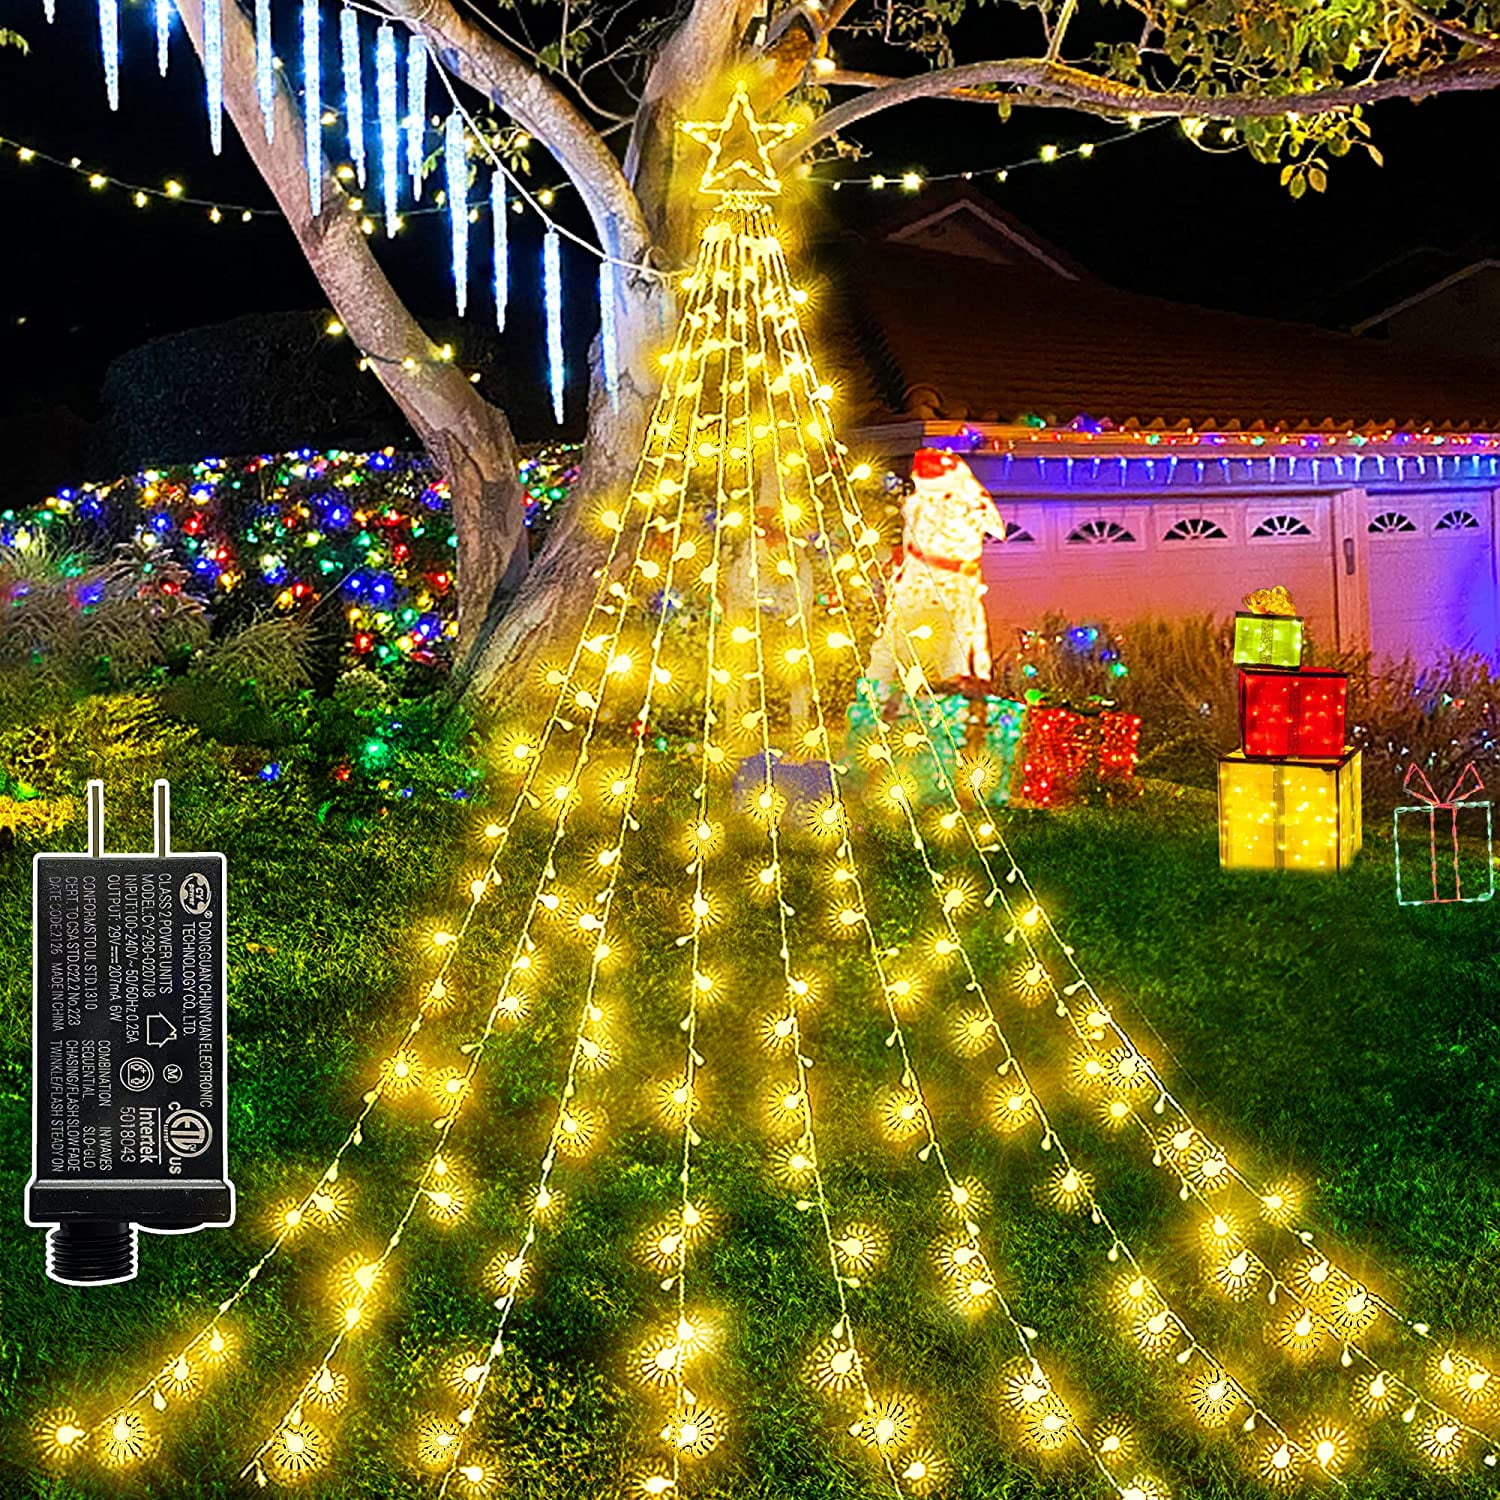 starry night Christmas lights 5 boxes 35 feet total 350 lights total 